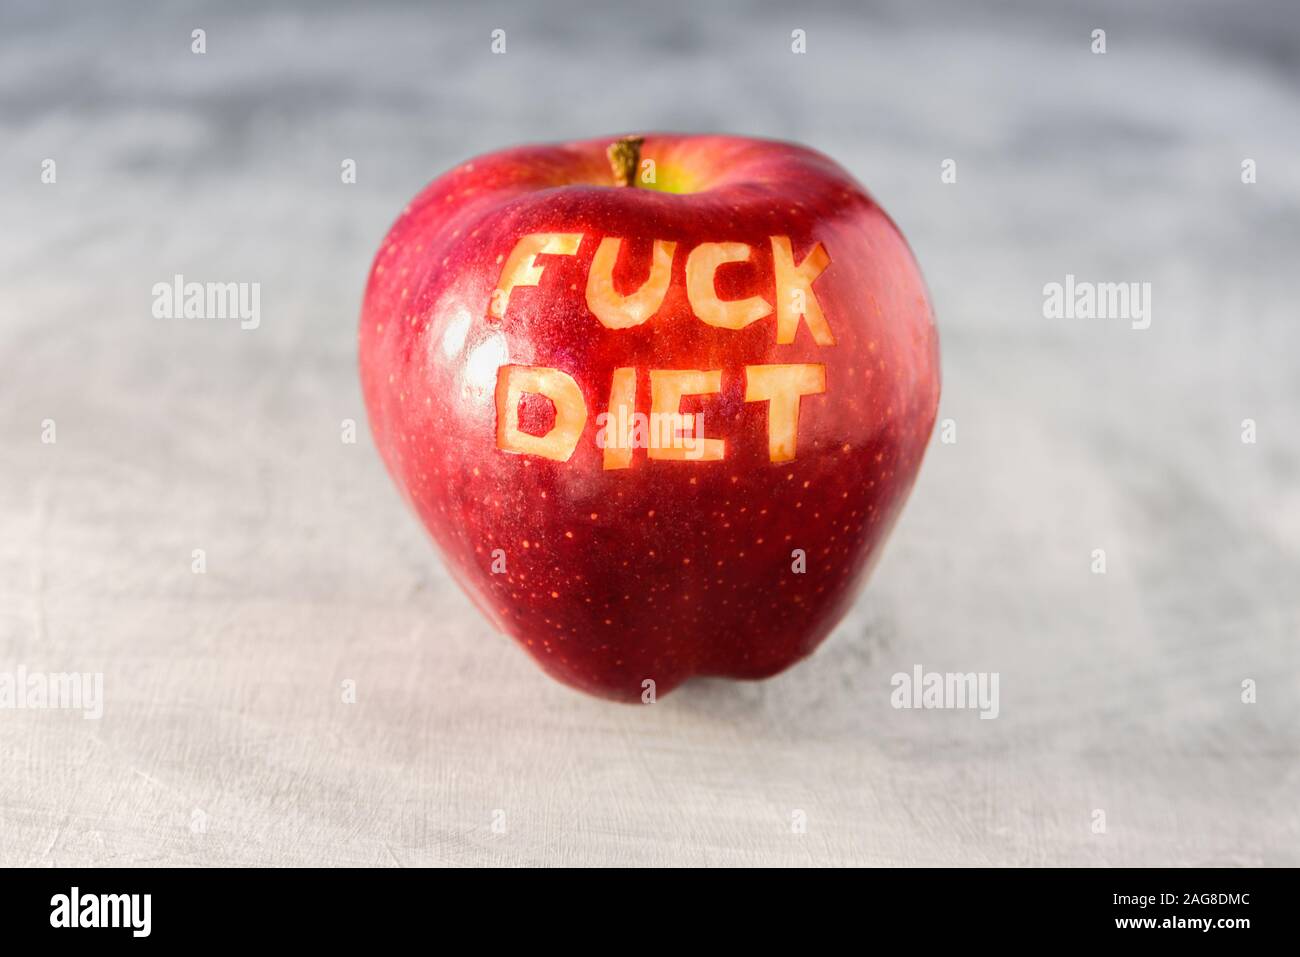 Big red apple on grey background. Dieting and weight loss concept Stock Photo